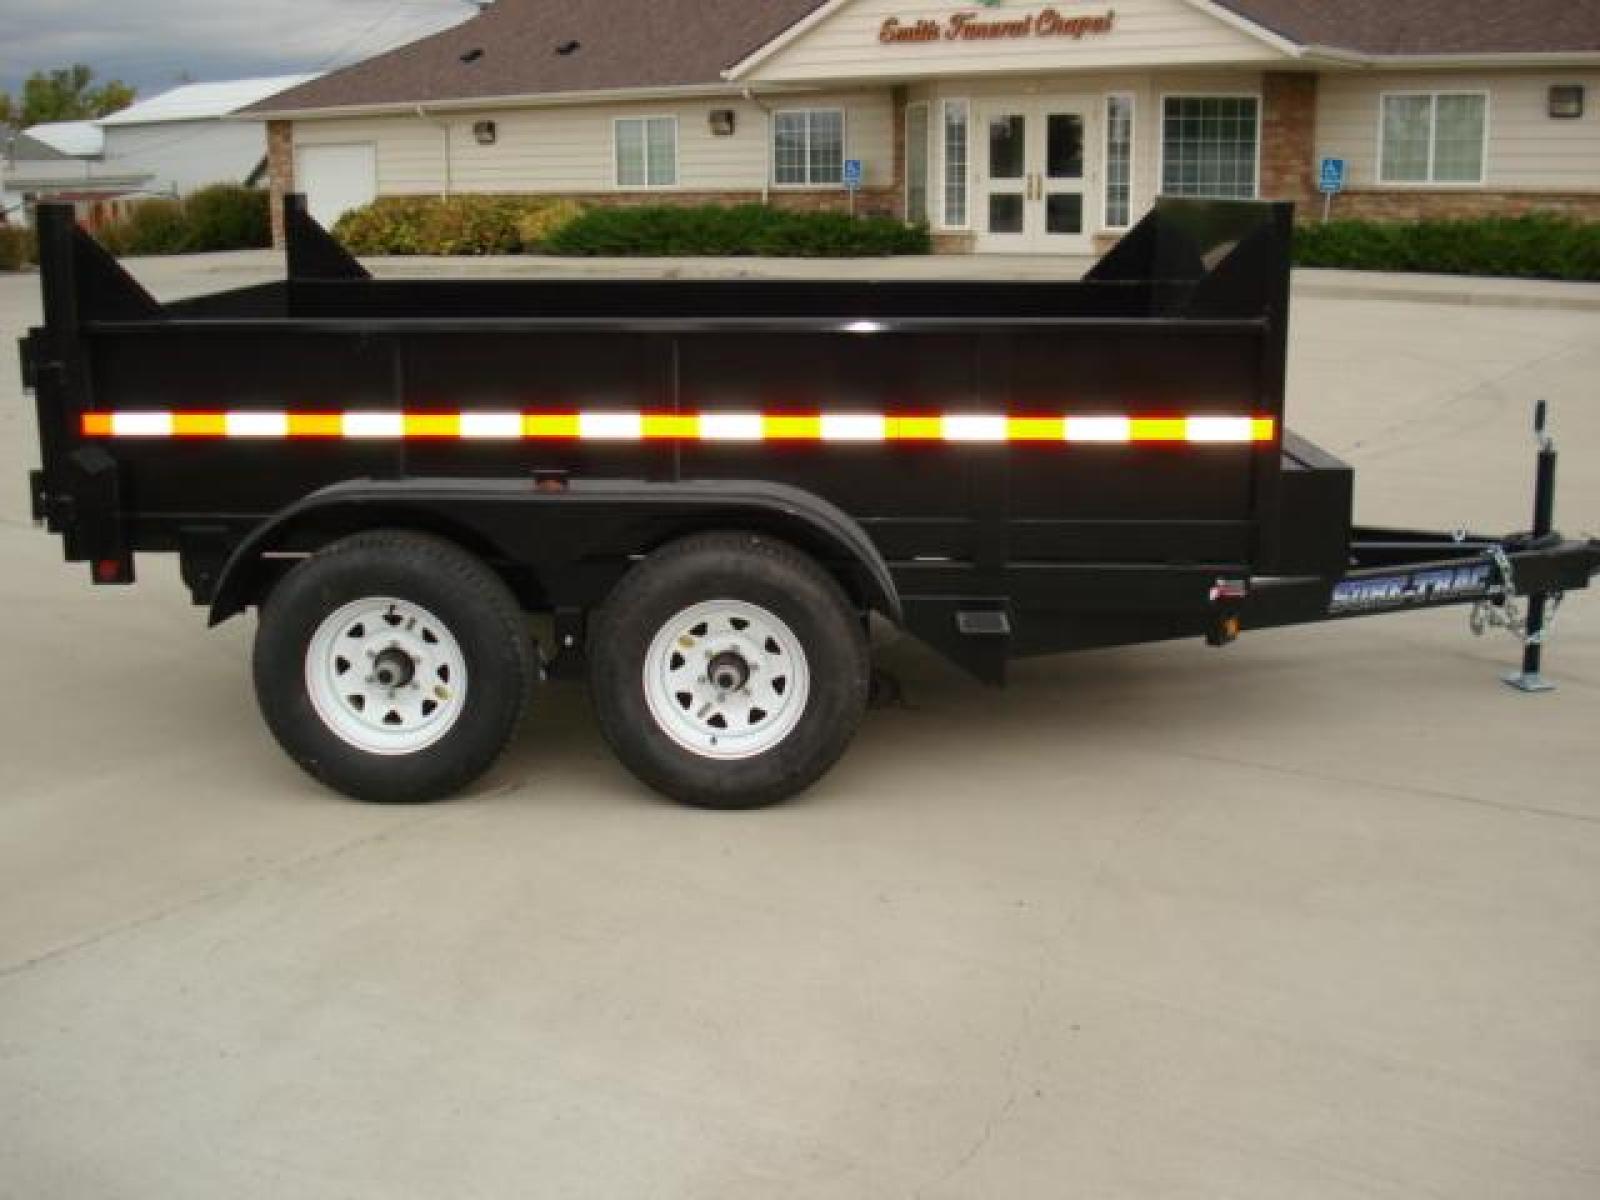 2022 Black SureTrac 6 x10 Lo Pro Dump Trailer , located at 310 West 1st Ave, Big Timber, MT, 59011, (406) 860-8510, 45.833511, -109.957809 - SURE-TRAC 6 X 10 LO PRO DUMP TRAILER, 10K GVW, SINGLE RAM HOIST, EZ LUBE HUBS, DUAL REAR GATE, BRAKES BOTH AXLES, EZ LUBE HUBS, (5) D-RING TIE-DOWNS, LED LIGHTS, POWDER COAT FINISH, REAR RAMPS, MESH TARP, DEEP CYCLE BATTERY. OPTIONS: SPARE TIRE $165.00. THE BEST TRAILERS AT THE BEST PRICE!!! - Photo #6